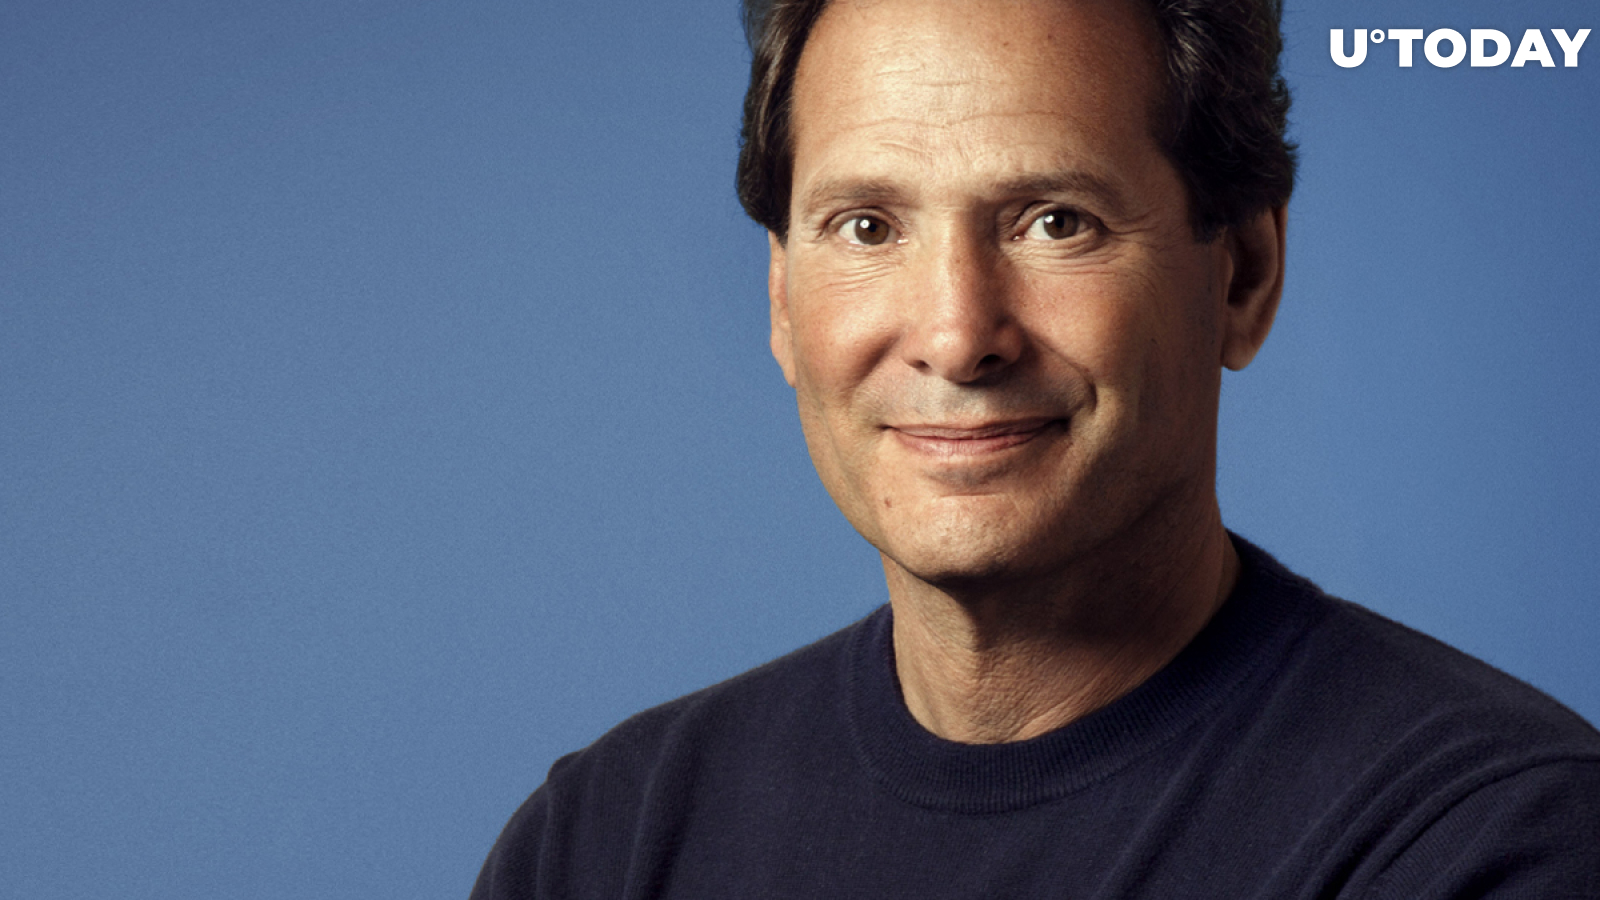 PayPal CEO Says Now Is the Time for Cryptocurrencies to Go Mainstream